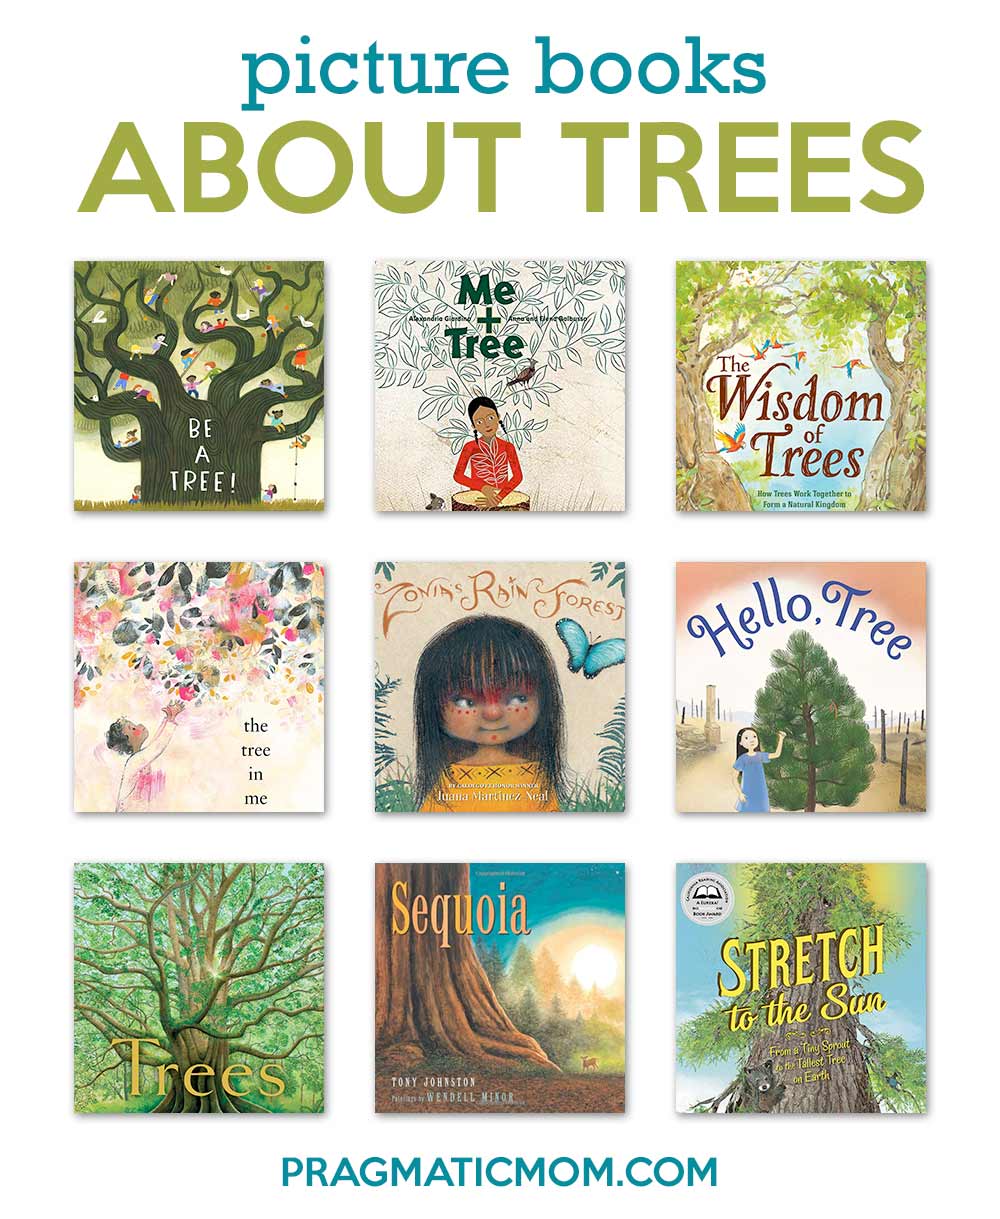 Celebrate Tree Picture Books For Earth